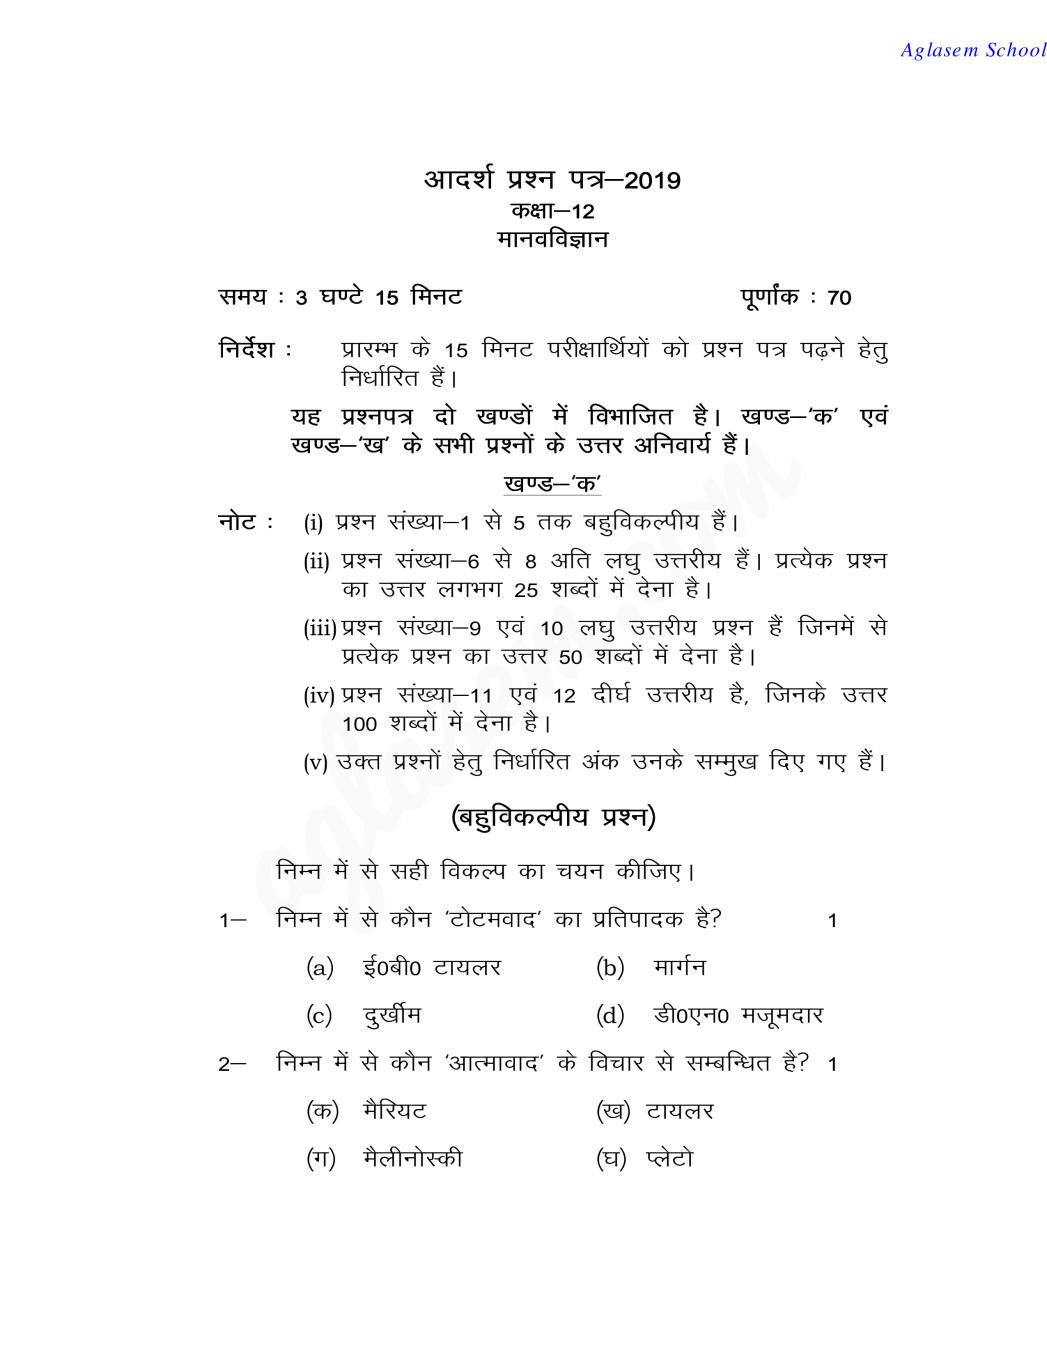 UP Board Class 12 Model Paper 2019 ANTHROPOLOGY - Page 1